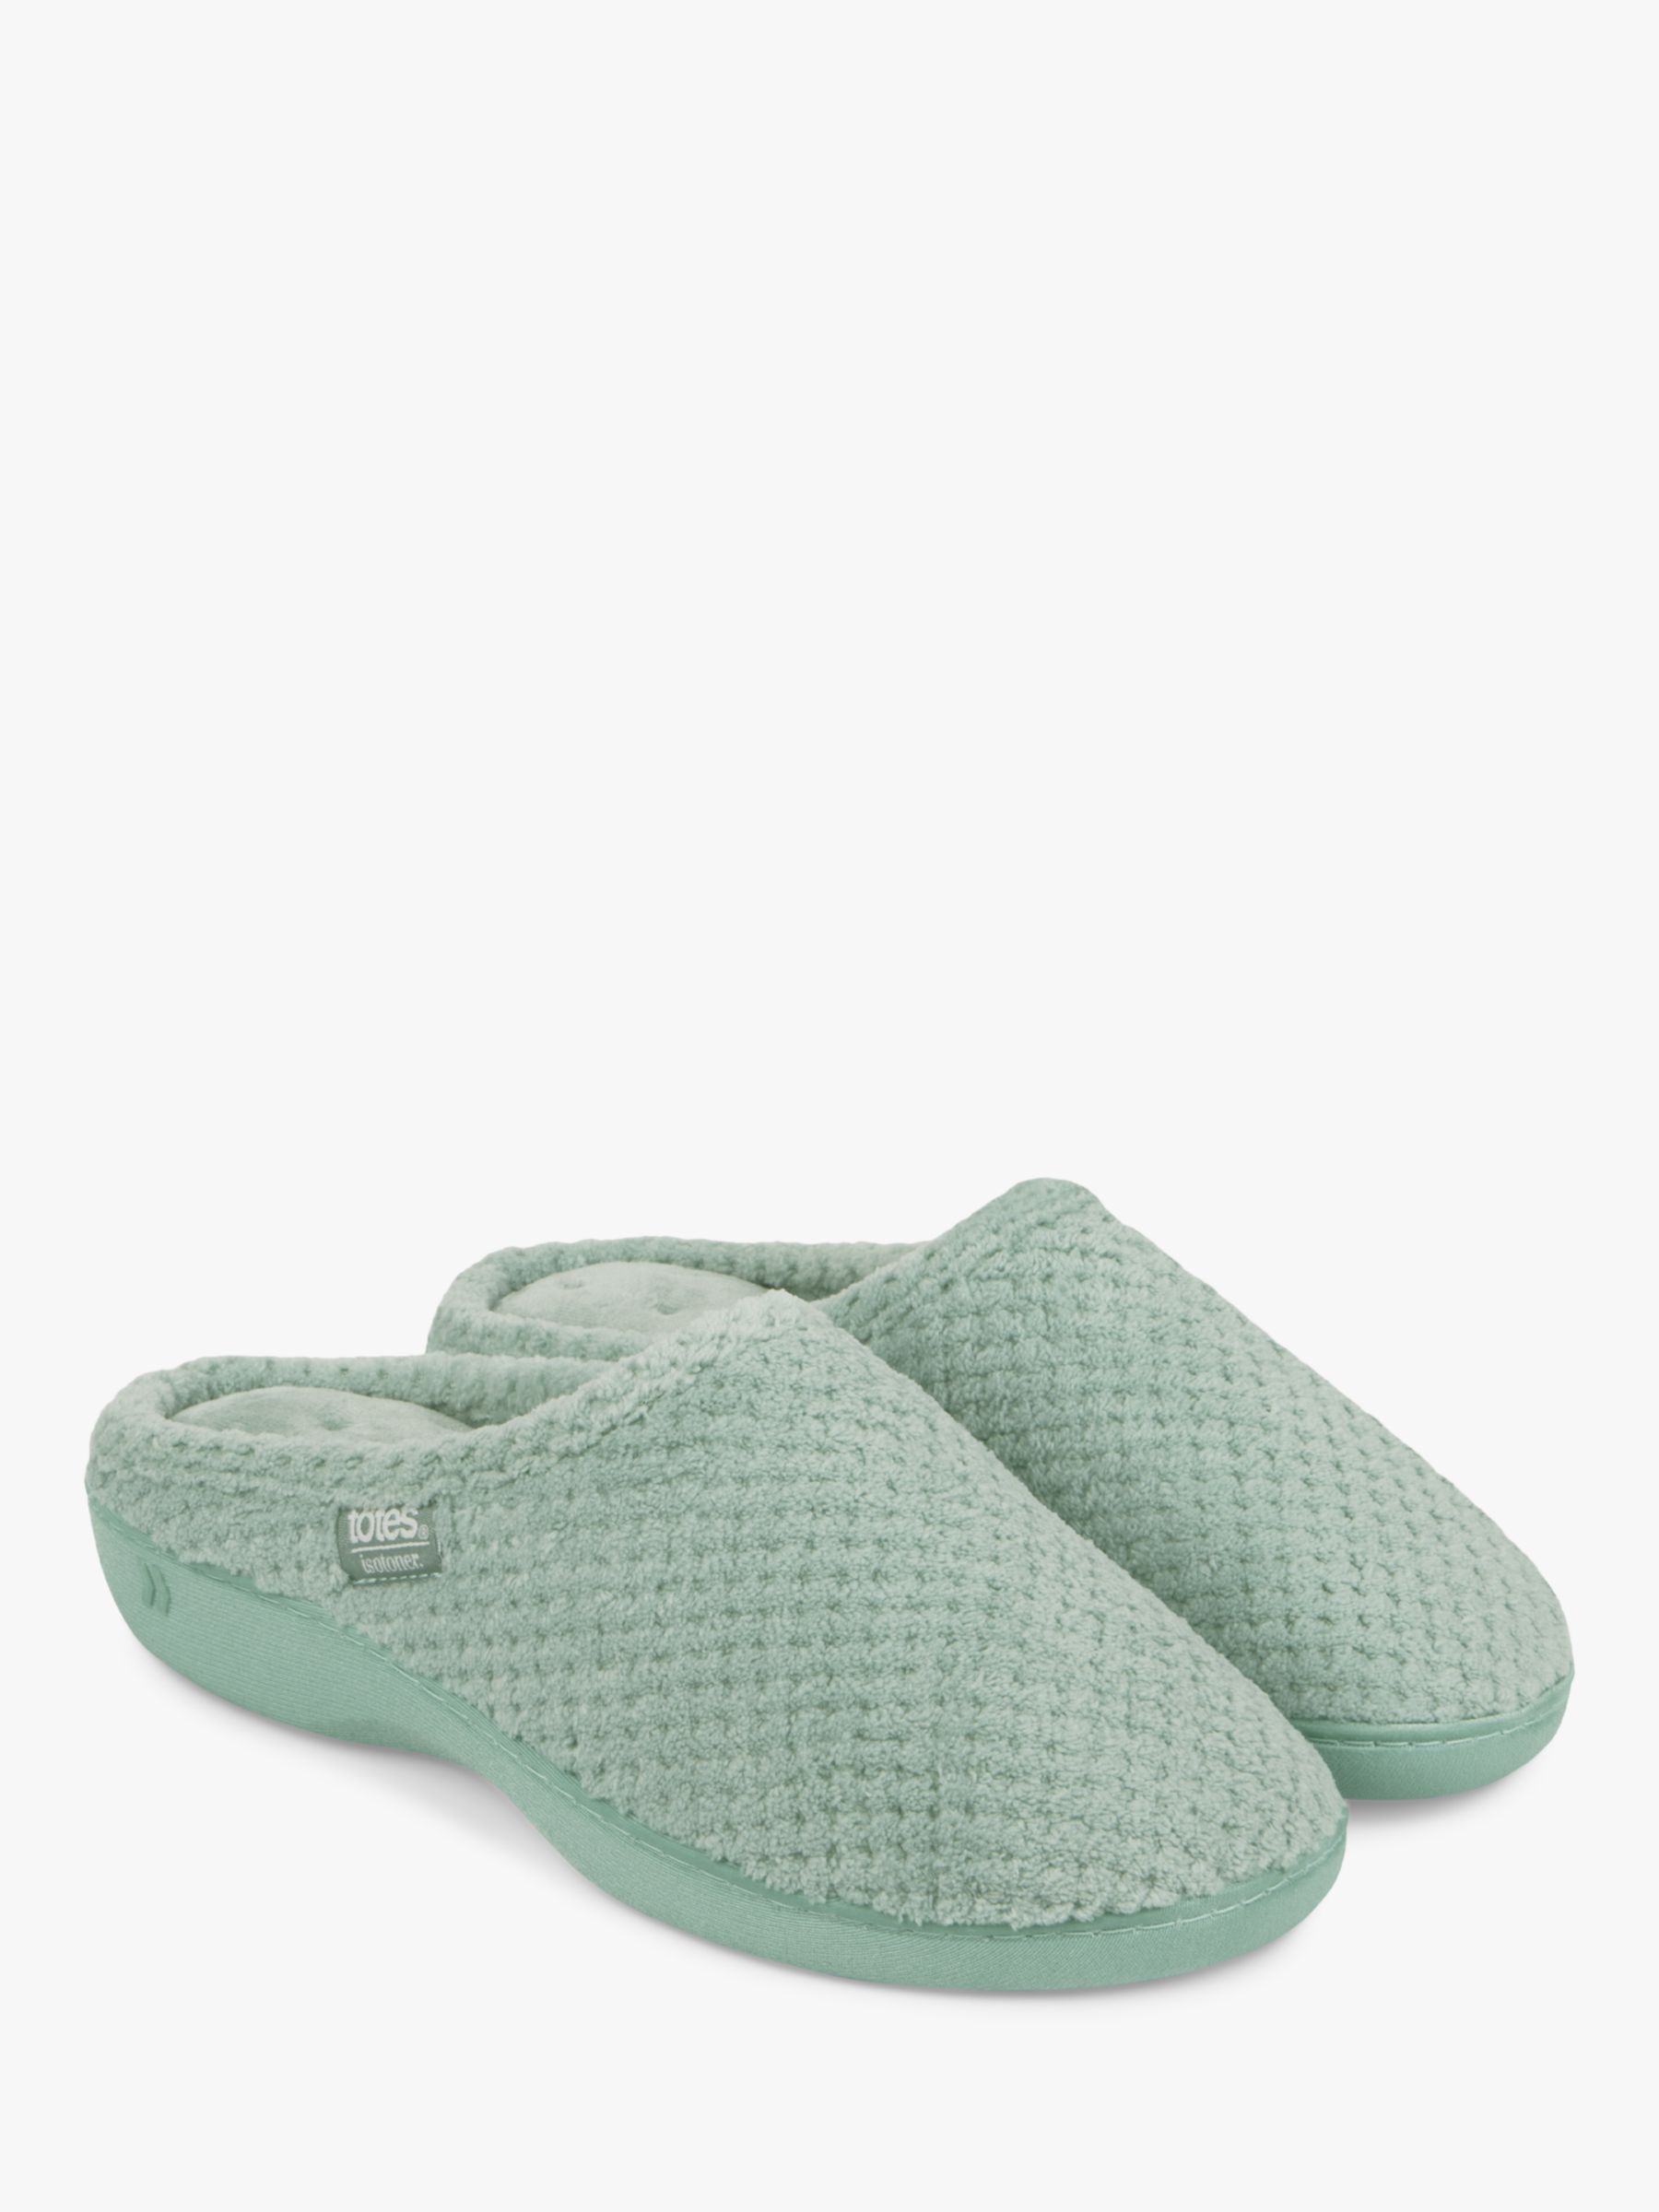 totes Popcorn Terry Mule Slippers, Mint, 4